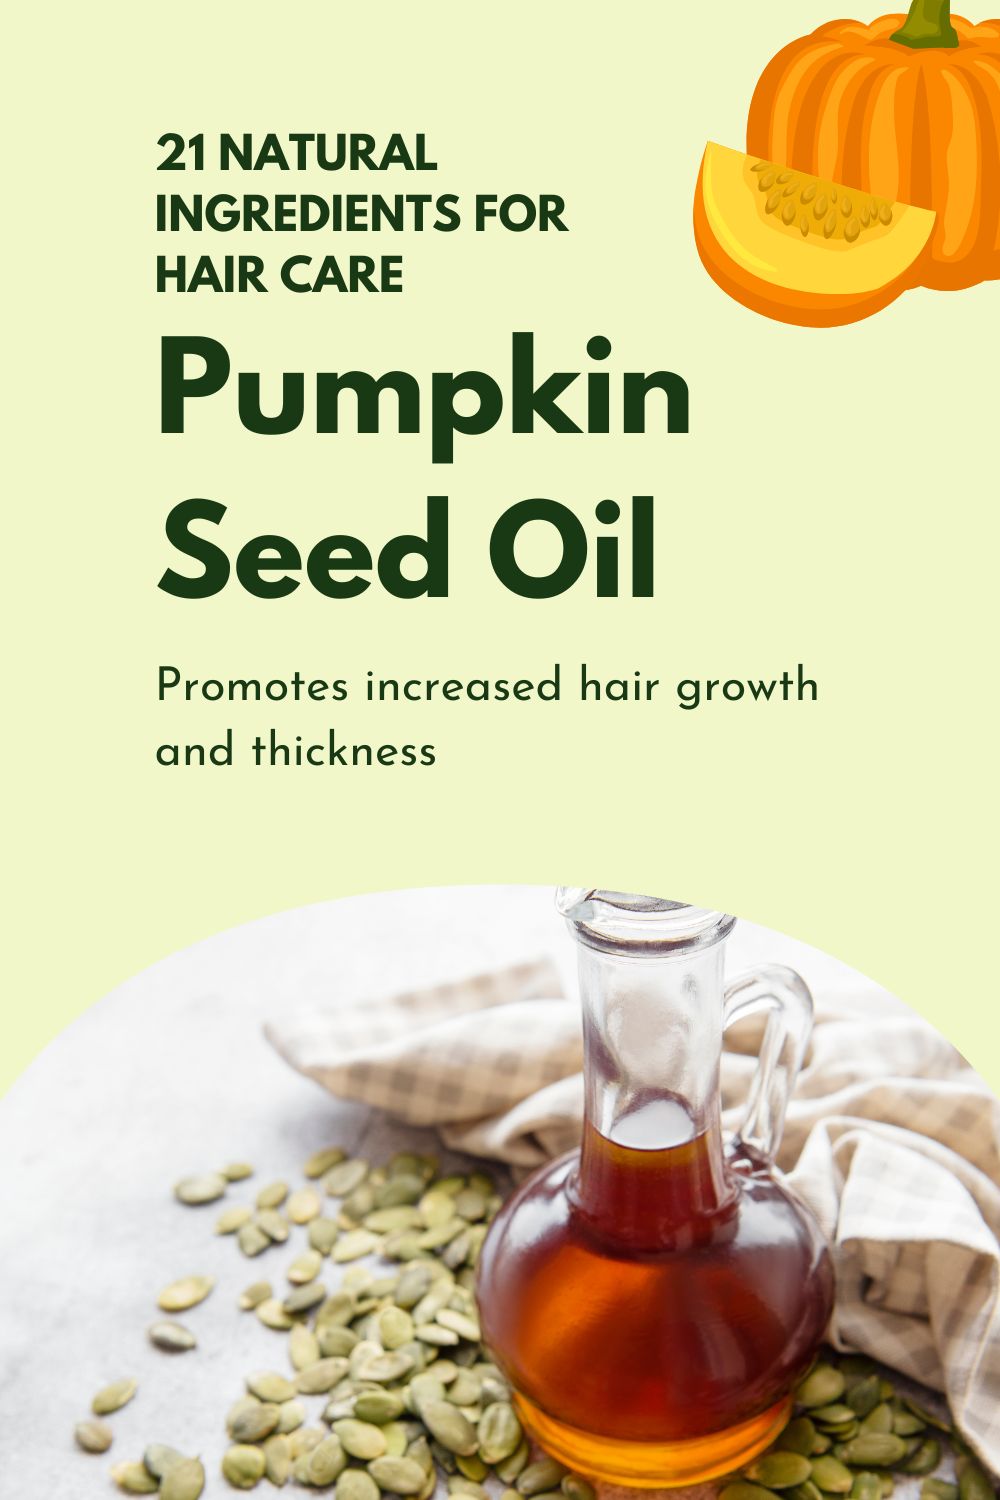 Pumpkin Seed Oil - Promotes increased hair growth and thickness